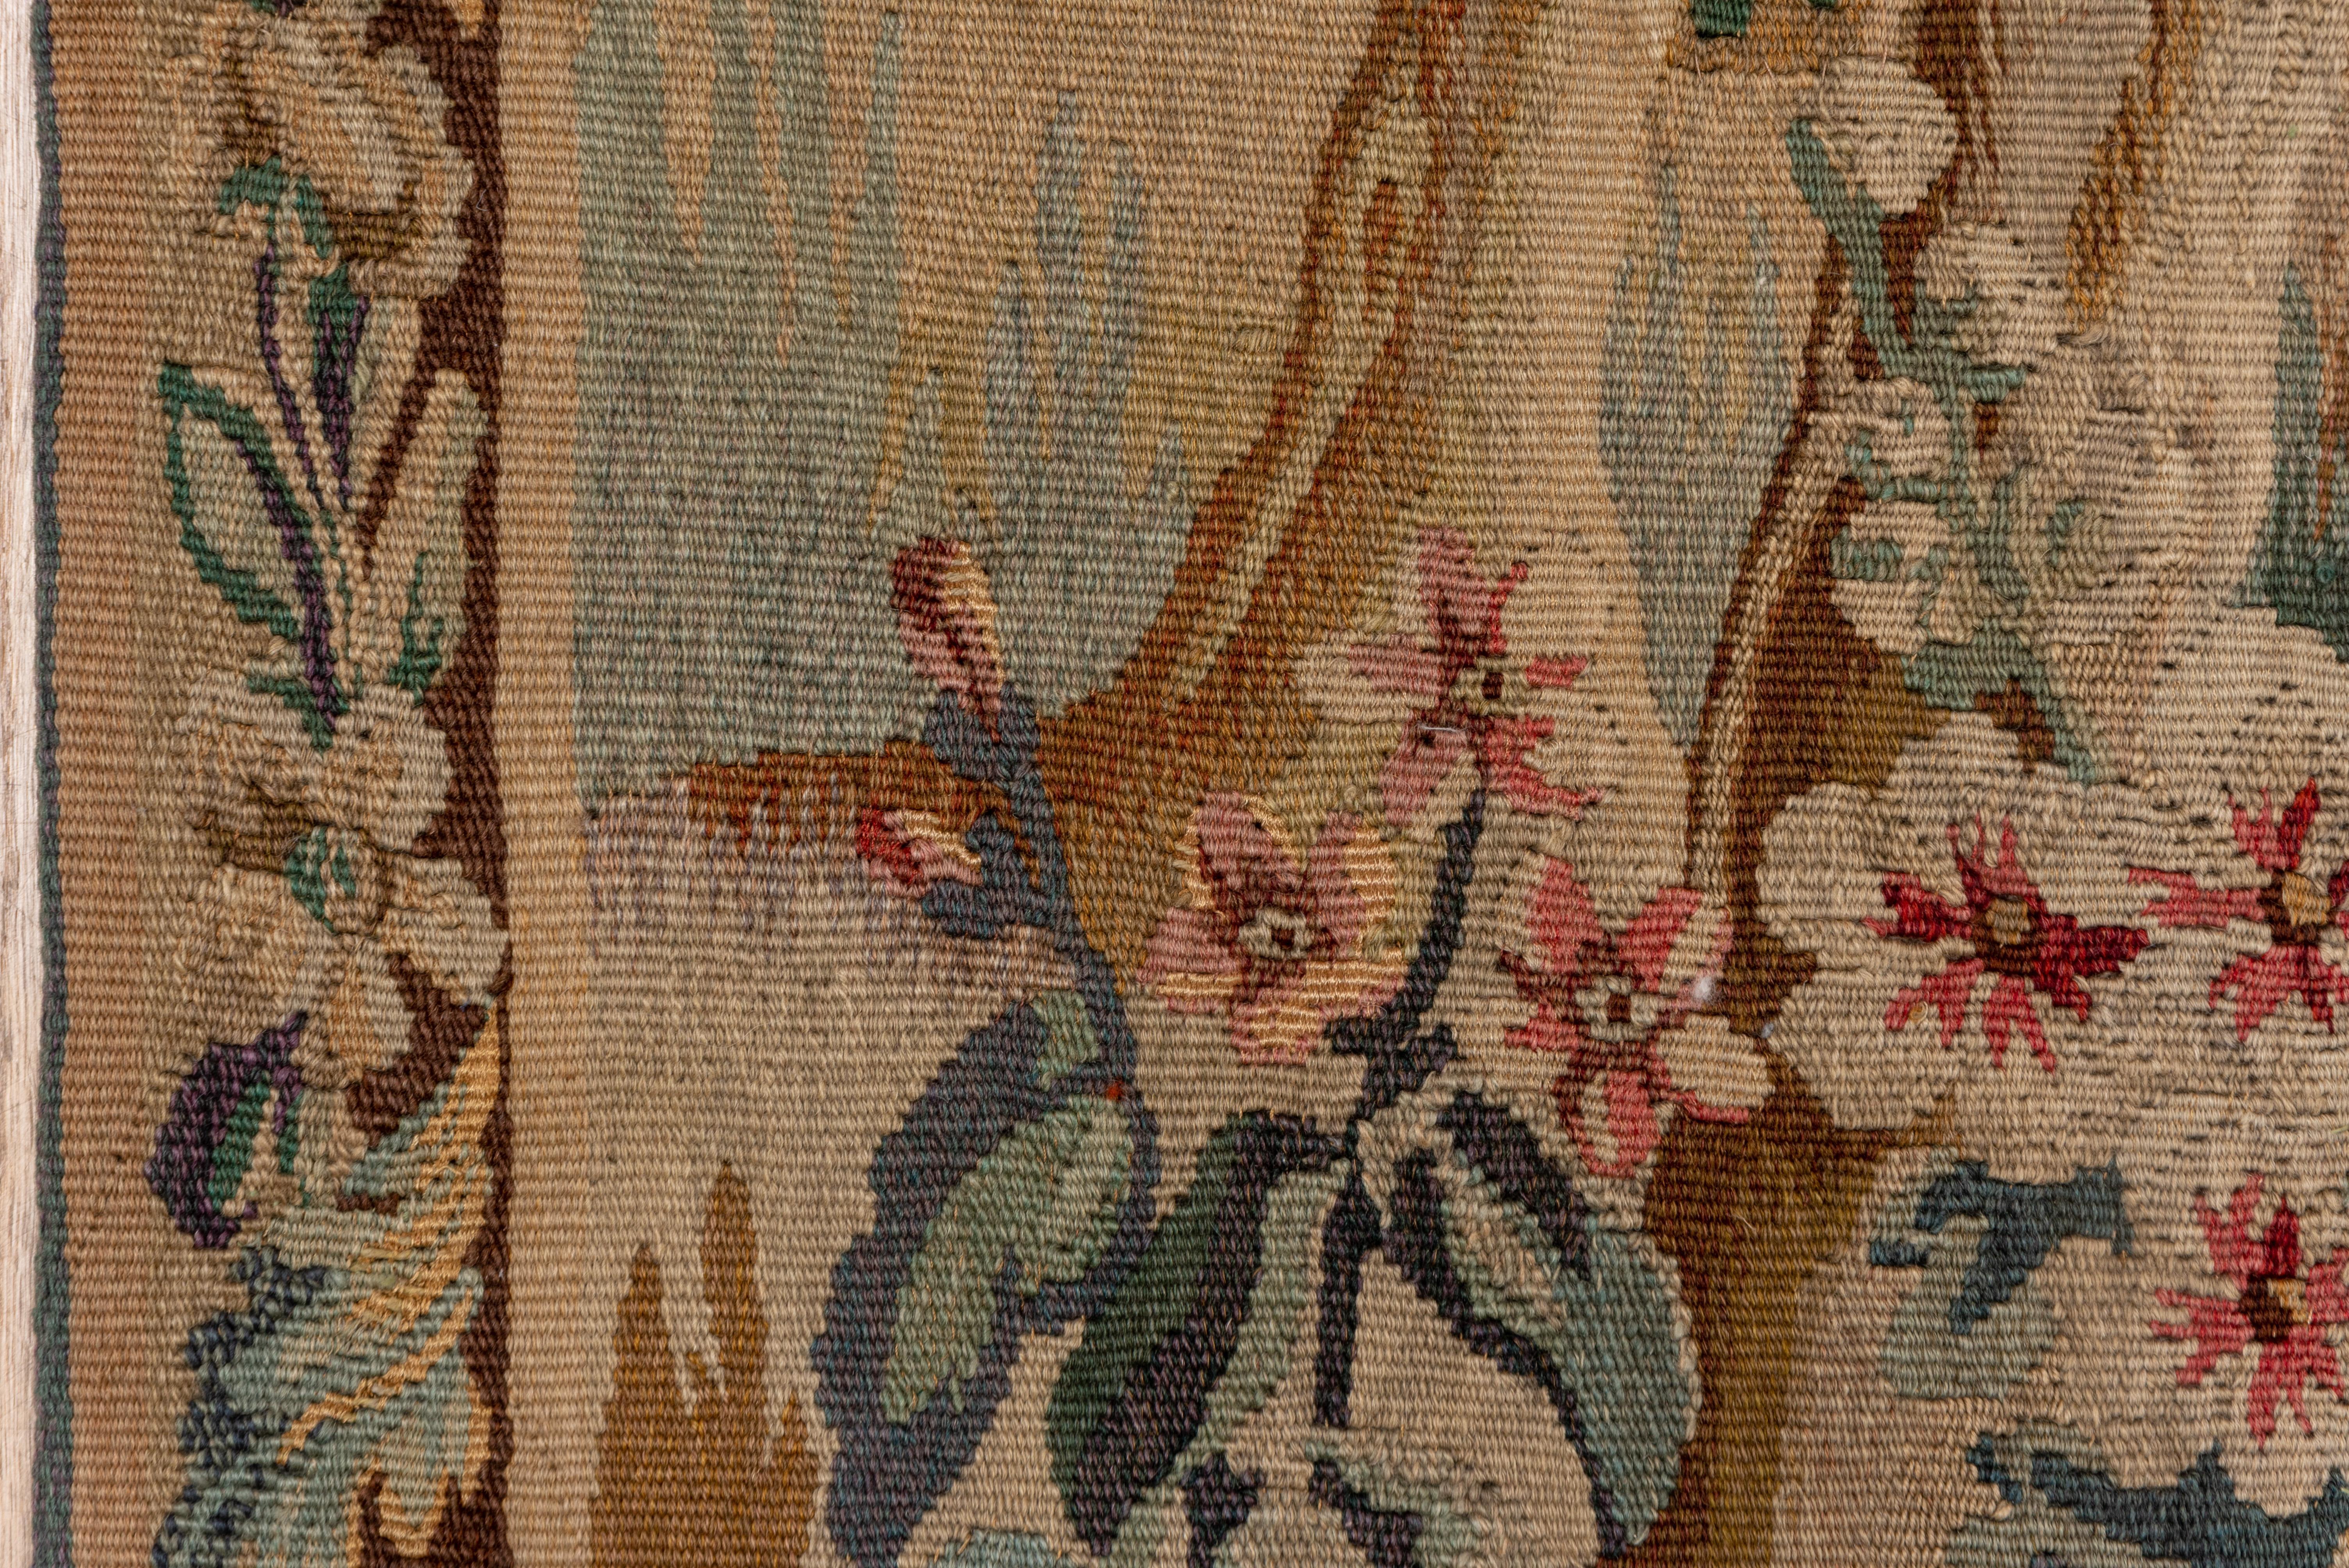 This softly toned verdure tapestry shows two leafy trees framing a scene of a fox and chicken, with a receding rustic landscape behind. Only the animal action disturbs the tranquil summer scene. Red and green rose and leaf border.